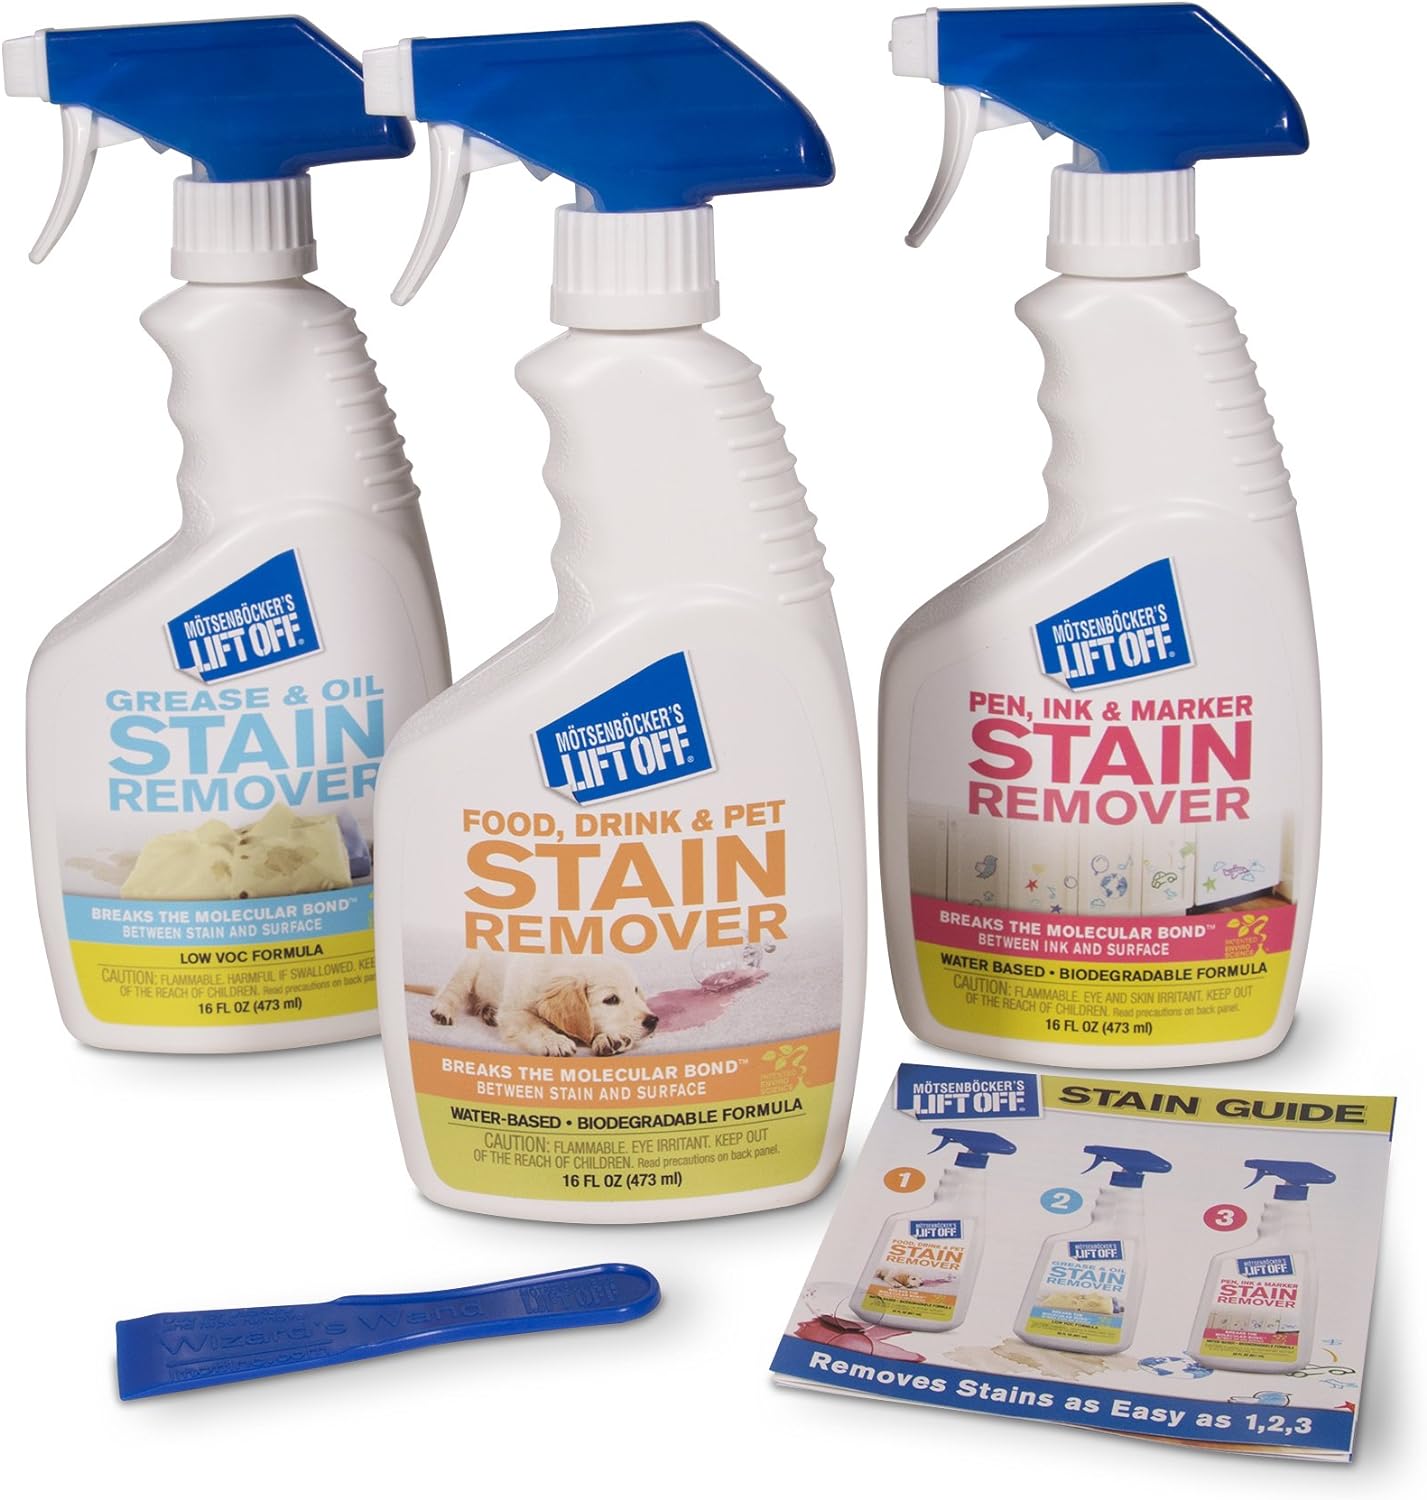 Motsenbocker’s Lift Off 99089 3-in-1 Stain Removal Kit 16-Ounce Spray Bottles Fast and Easy Removal of All Types of Stains Use for Pre-Wash Laundry Treatment Safe on Non-Washables Low VOCs, Set of 3